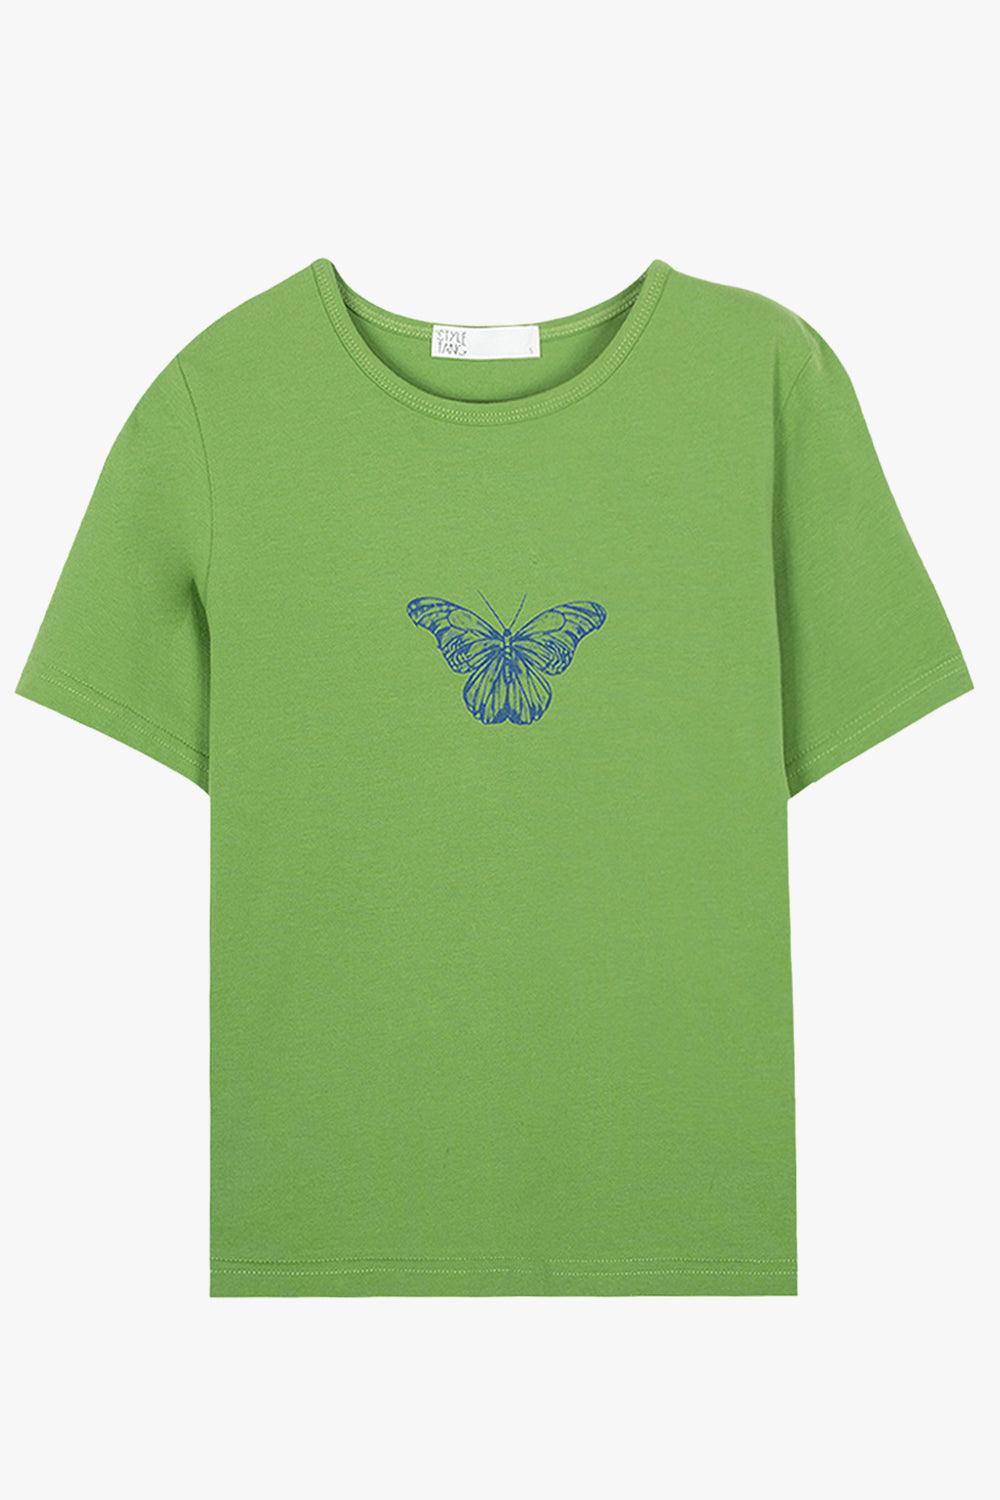 Indie Green Butterfly T-Shirt - Aesthetic Clothes Shop